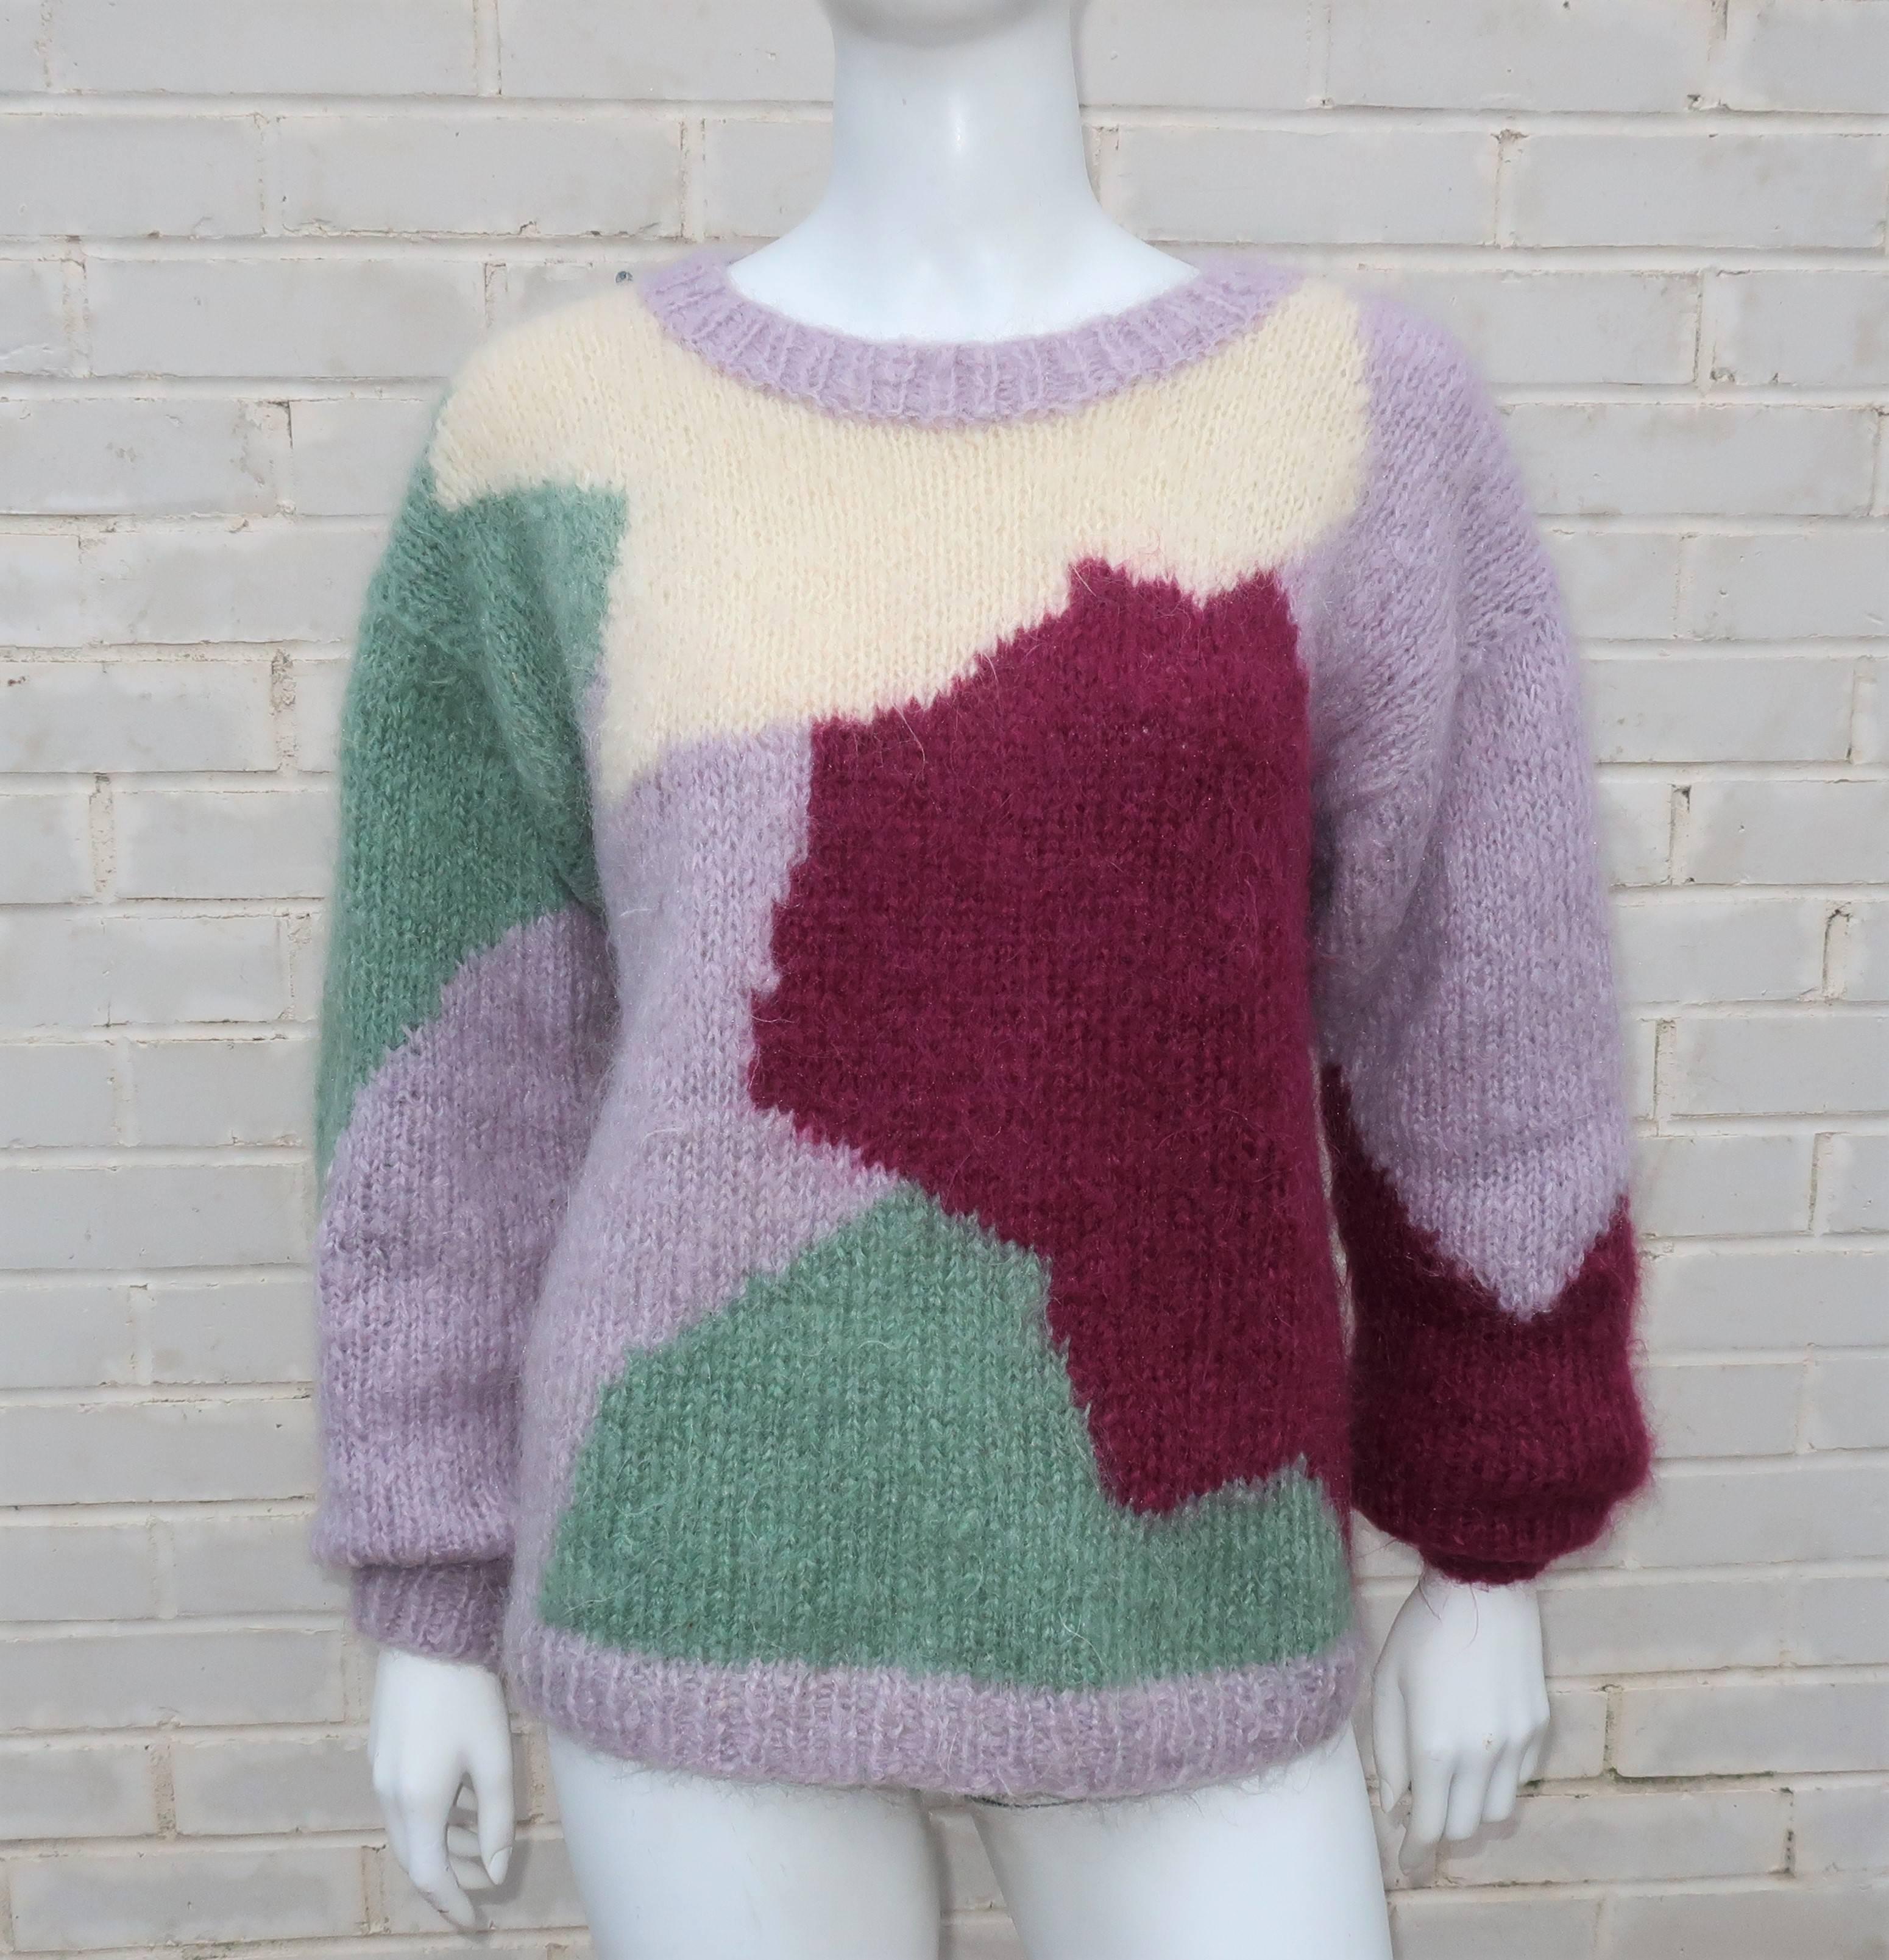 This pullover 1980's 'boyfriend' style sweater is fabricated from a color blocked pattern of mohair in plum, lavender, sage green and creamy white.  Perfect cozy silhouette to pair with jeans.  Excellent vintage condition.
SIZING &